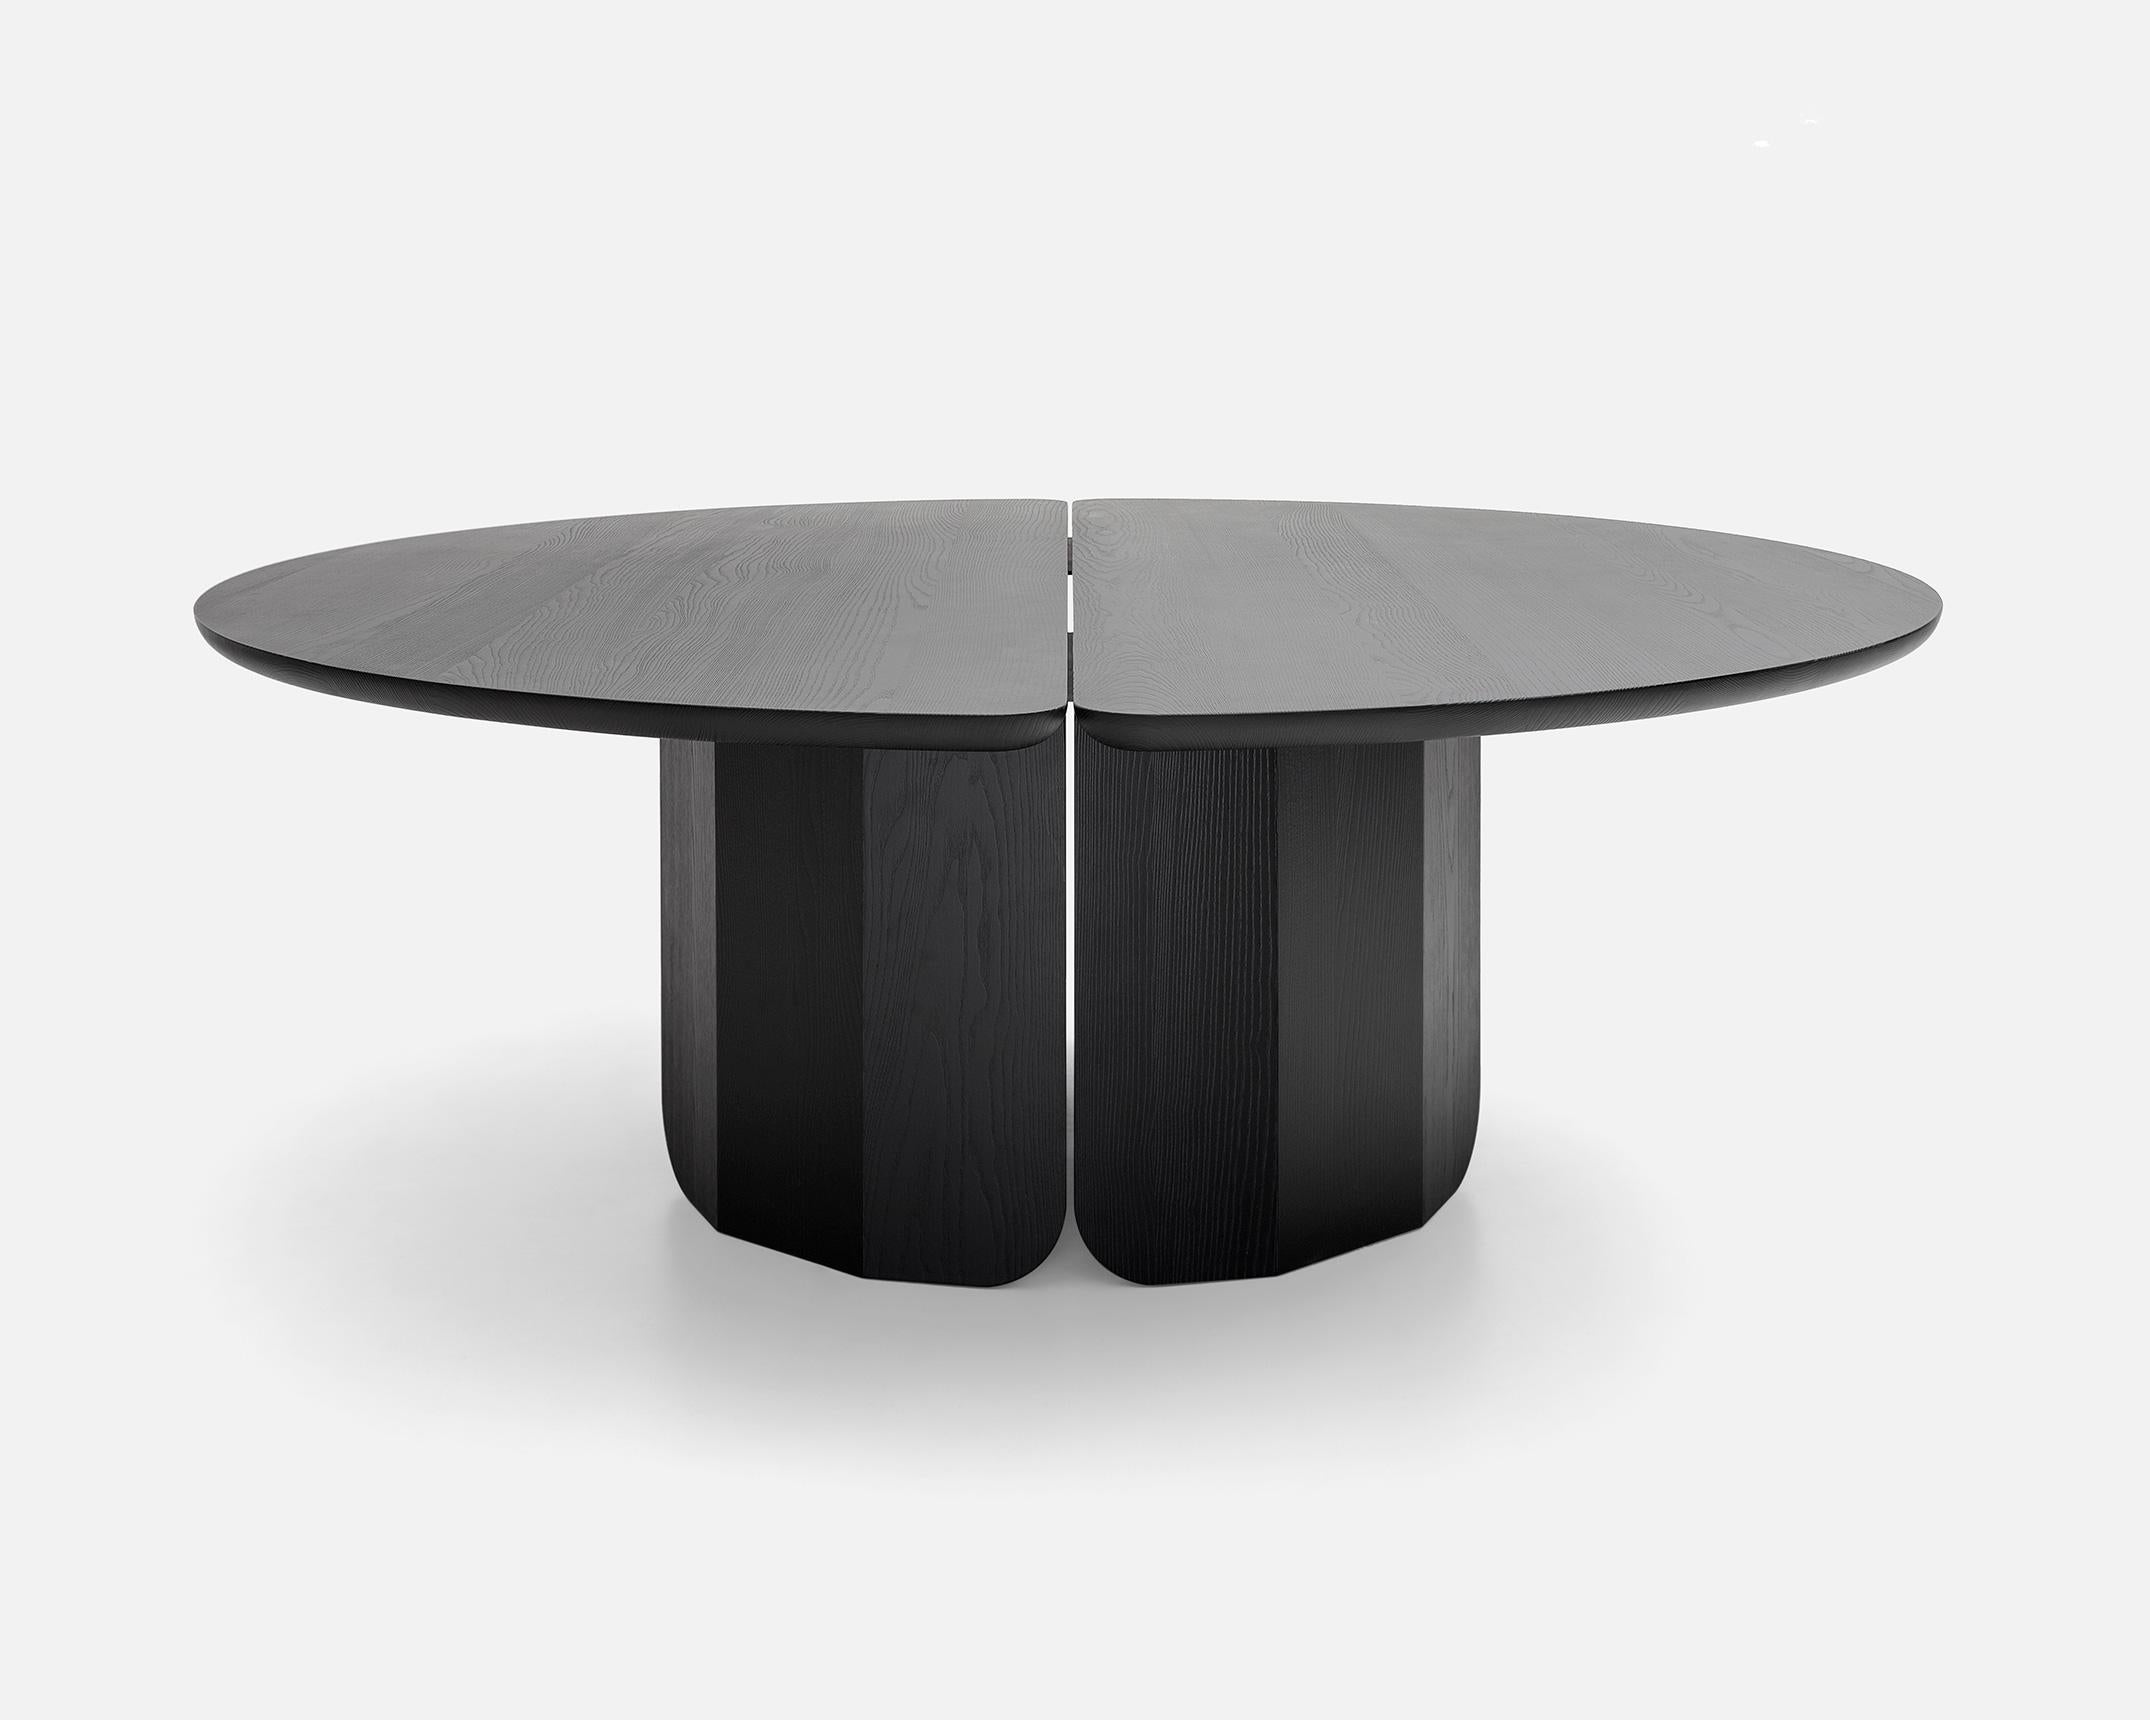 The table has a circular top in black-stained brushed ash, that can have a matt or glossy finish. It is composed of two semi-circles the form a central slit: the edge is rounded and curves inwards towards the center, highlighting the juxtaposition